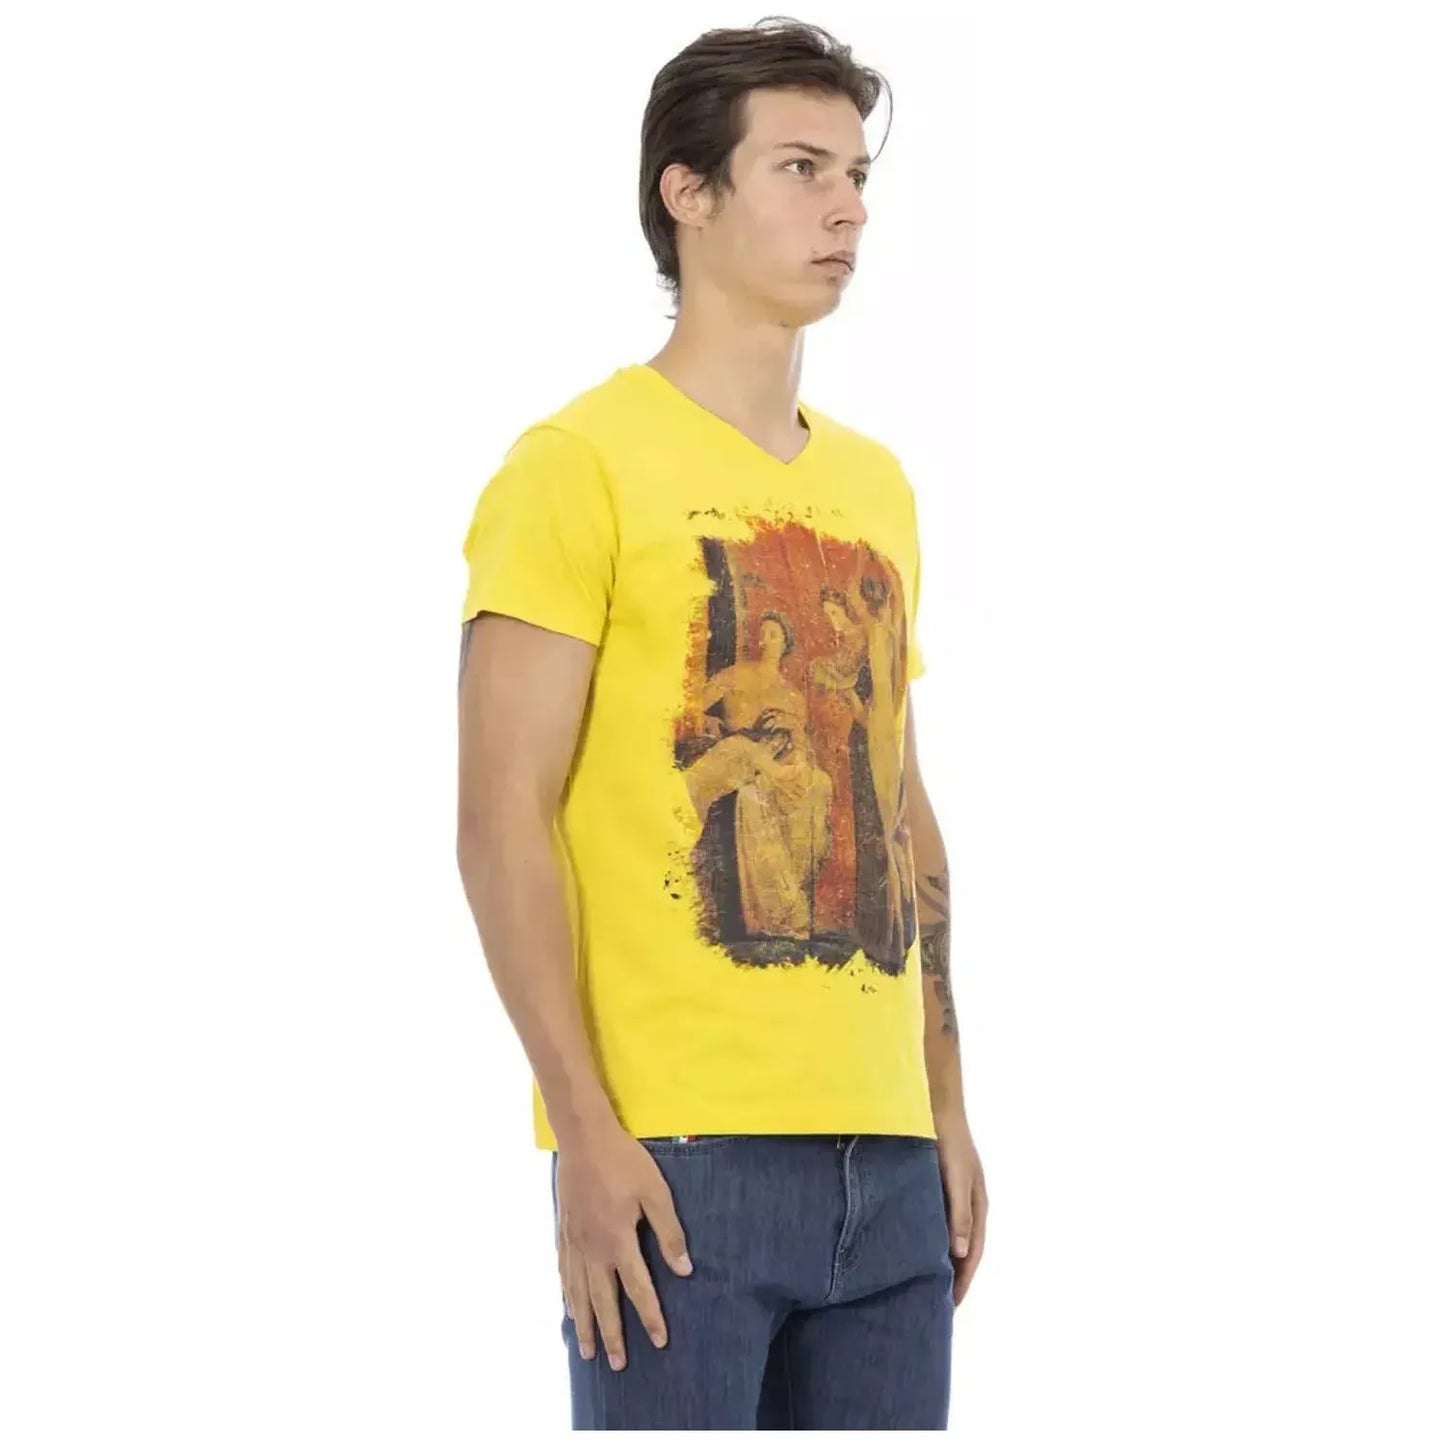 Trussardi Action Sunshine Yellow V-Neck Tee with Graphic Charm yellow-cotton-t-shirt-5